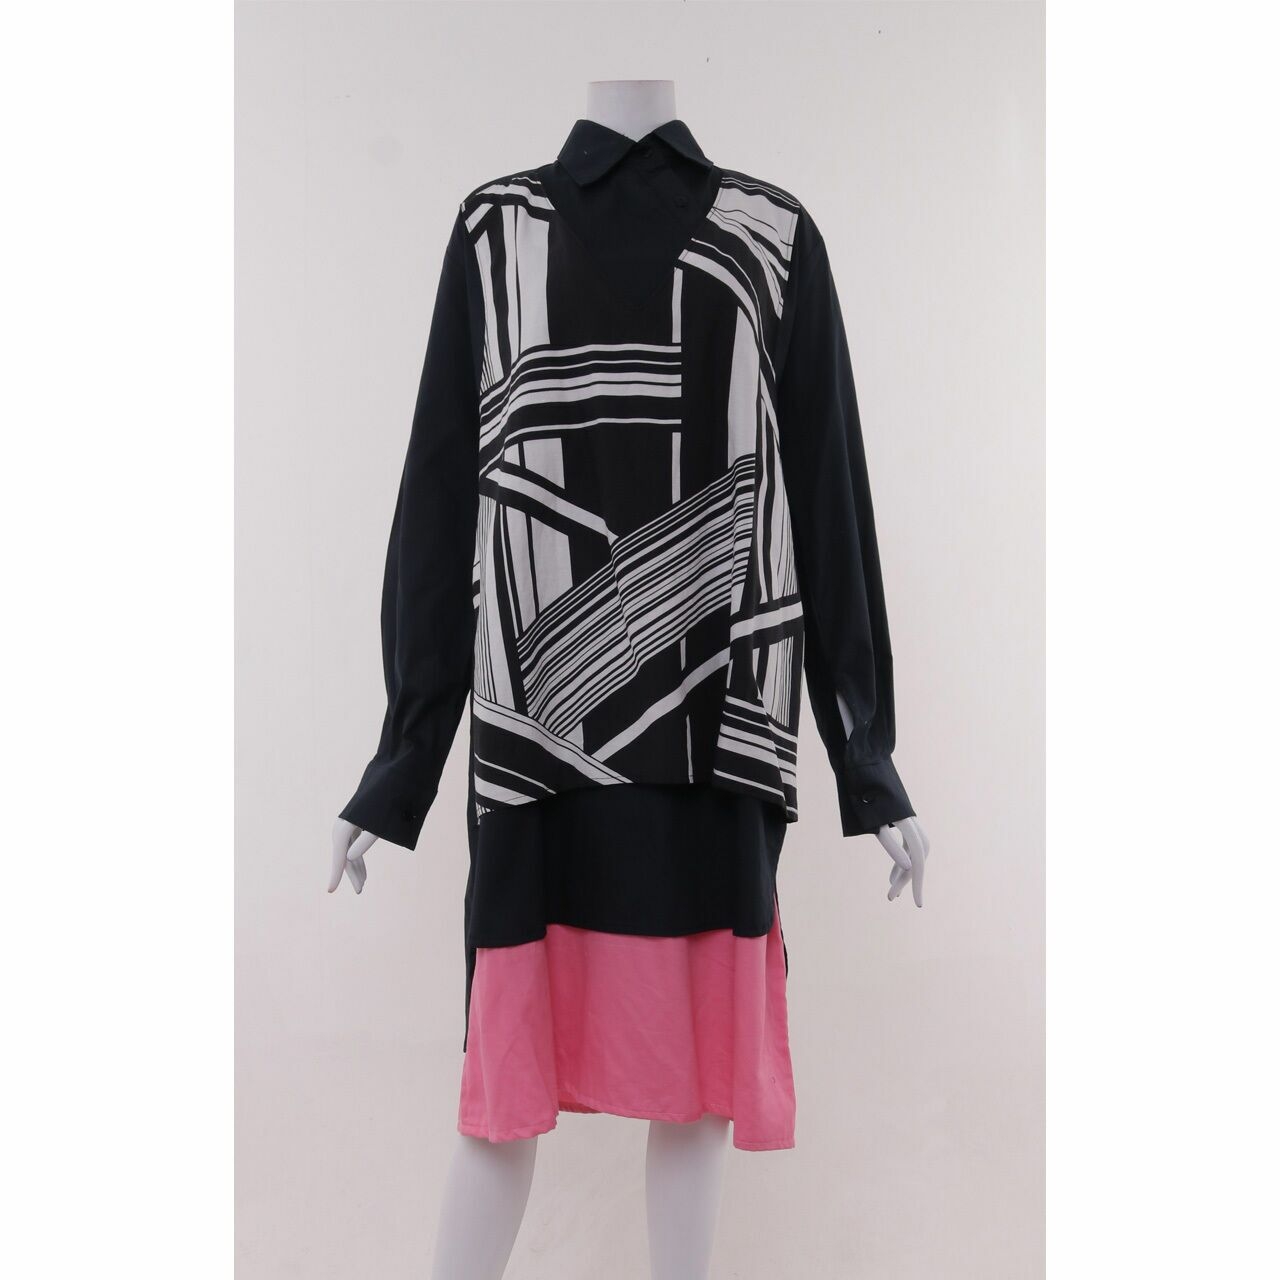 Nonss Navy/Black/White/Pink Tunic Blouse